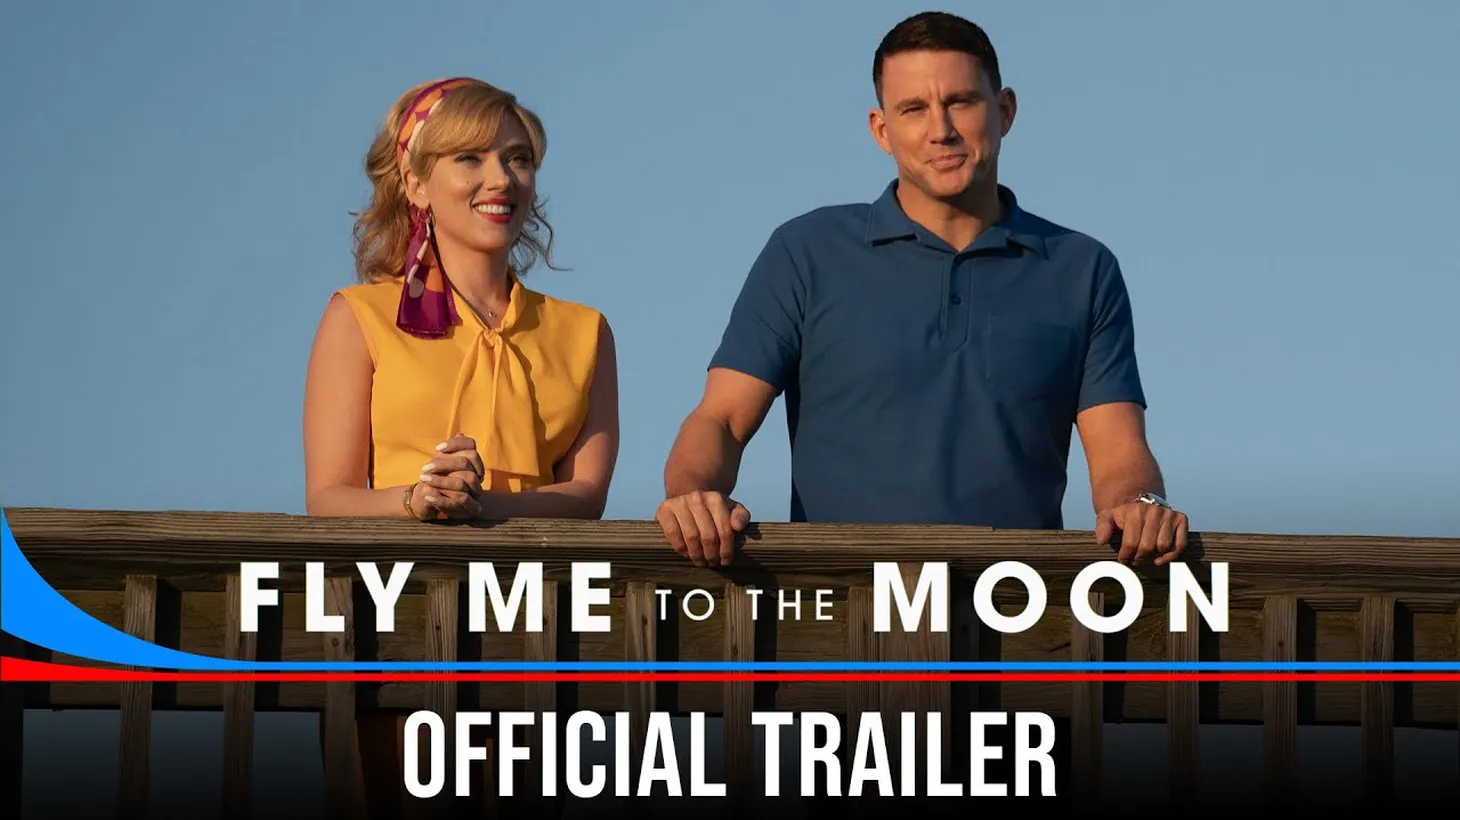 Channing Tatum and Scarlett Johansson star in “Fly Me to the Moon,” a romantic comedy is set in 1969.